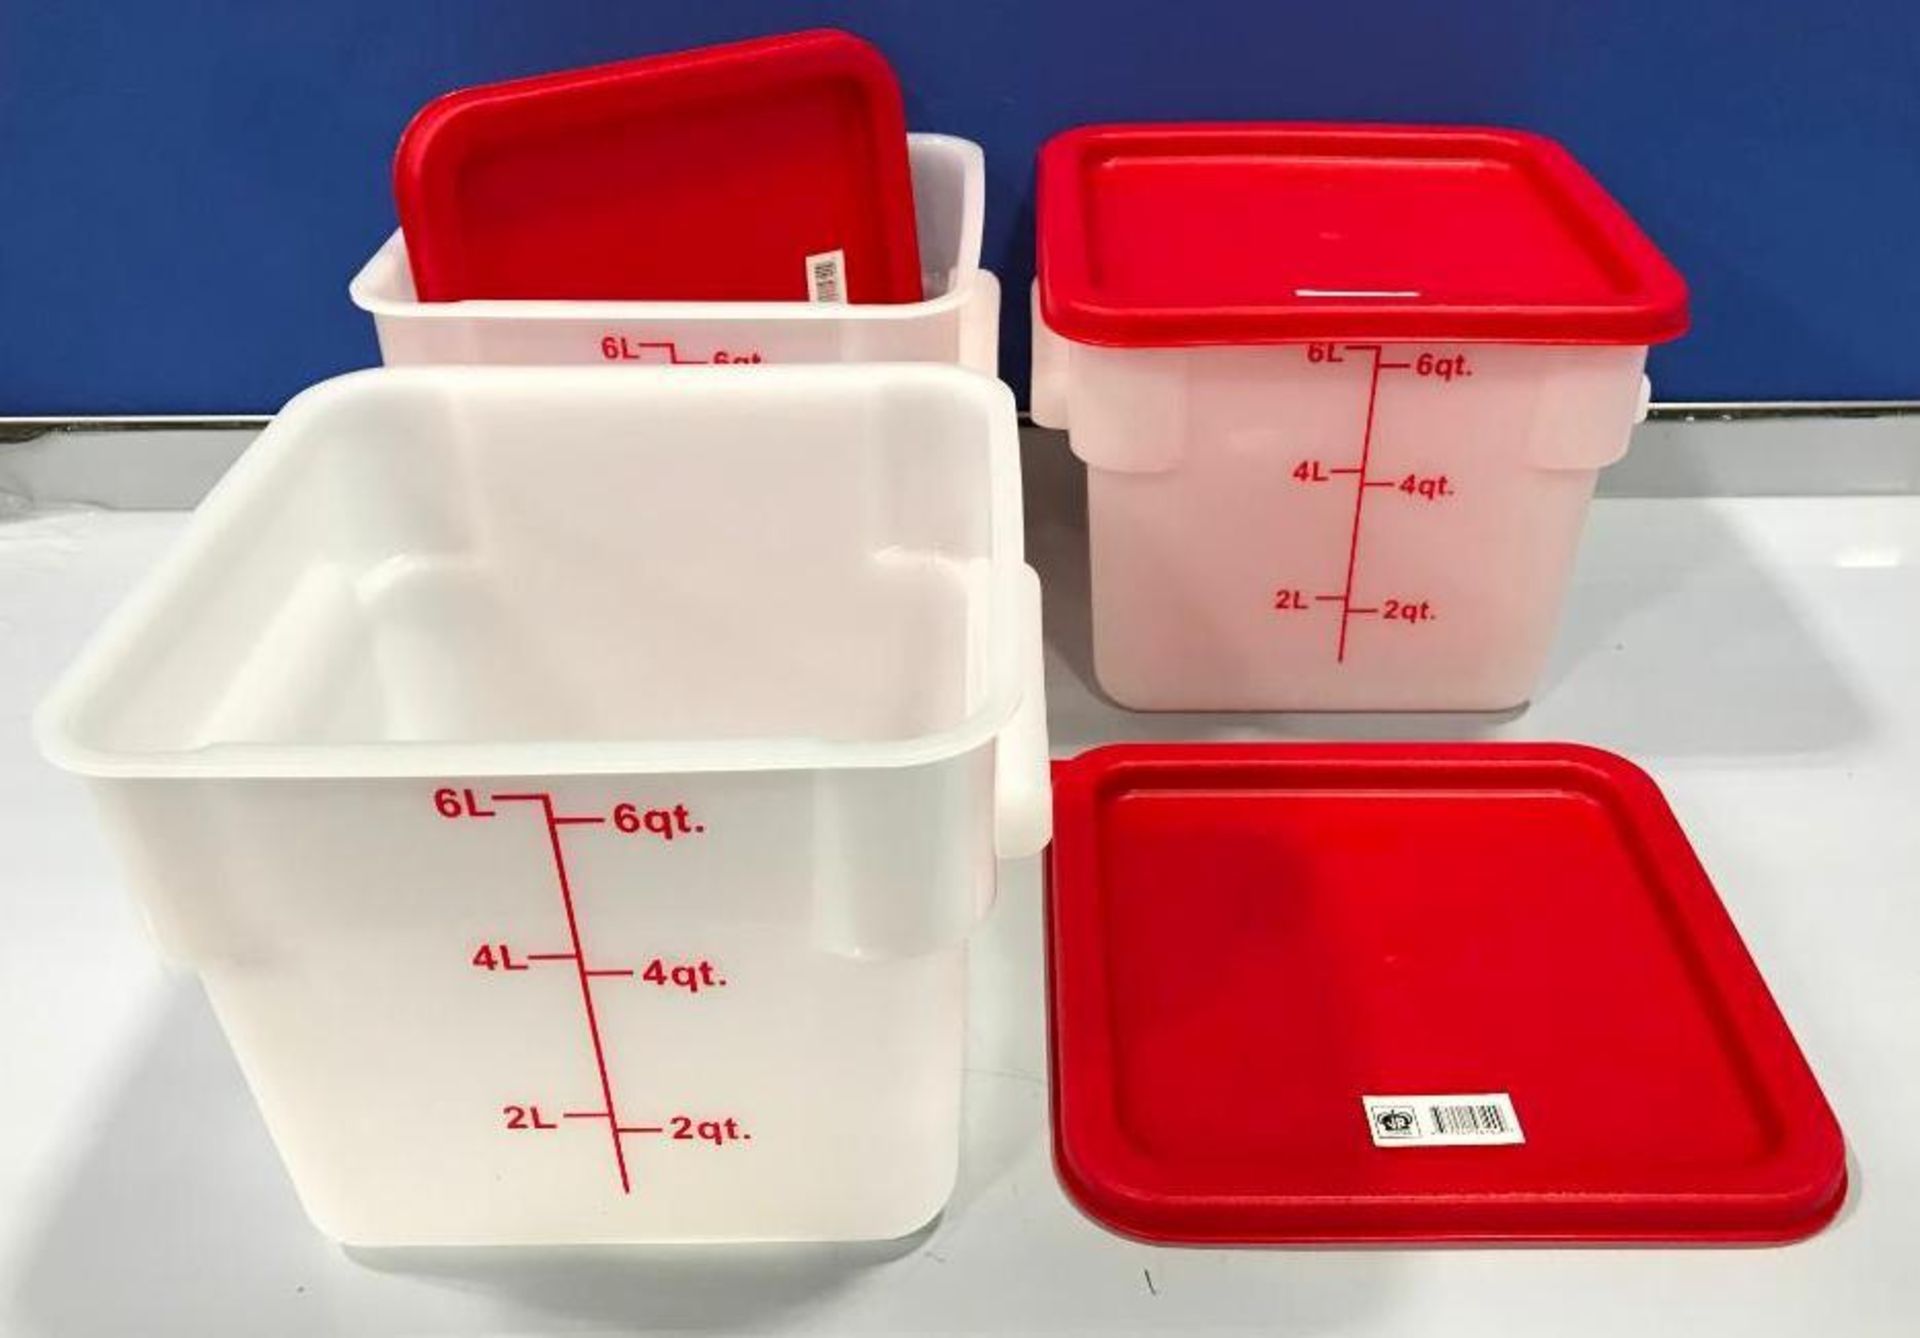 6QT SQUARE WHITE FOOD STORAGE CONTAINER, JOHNSON ROSE 56106 - LOT OF 3 - NEW - Image 2 of 2